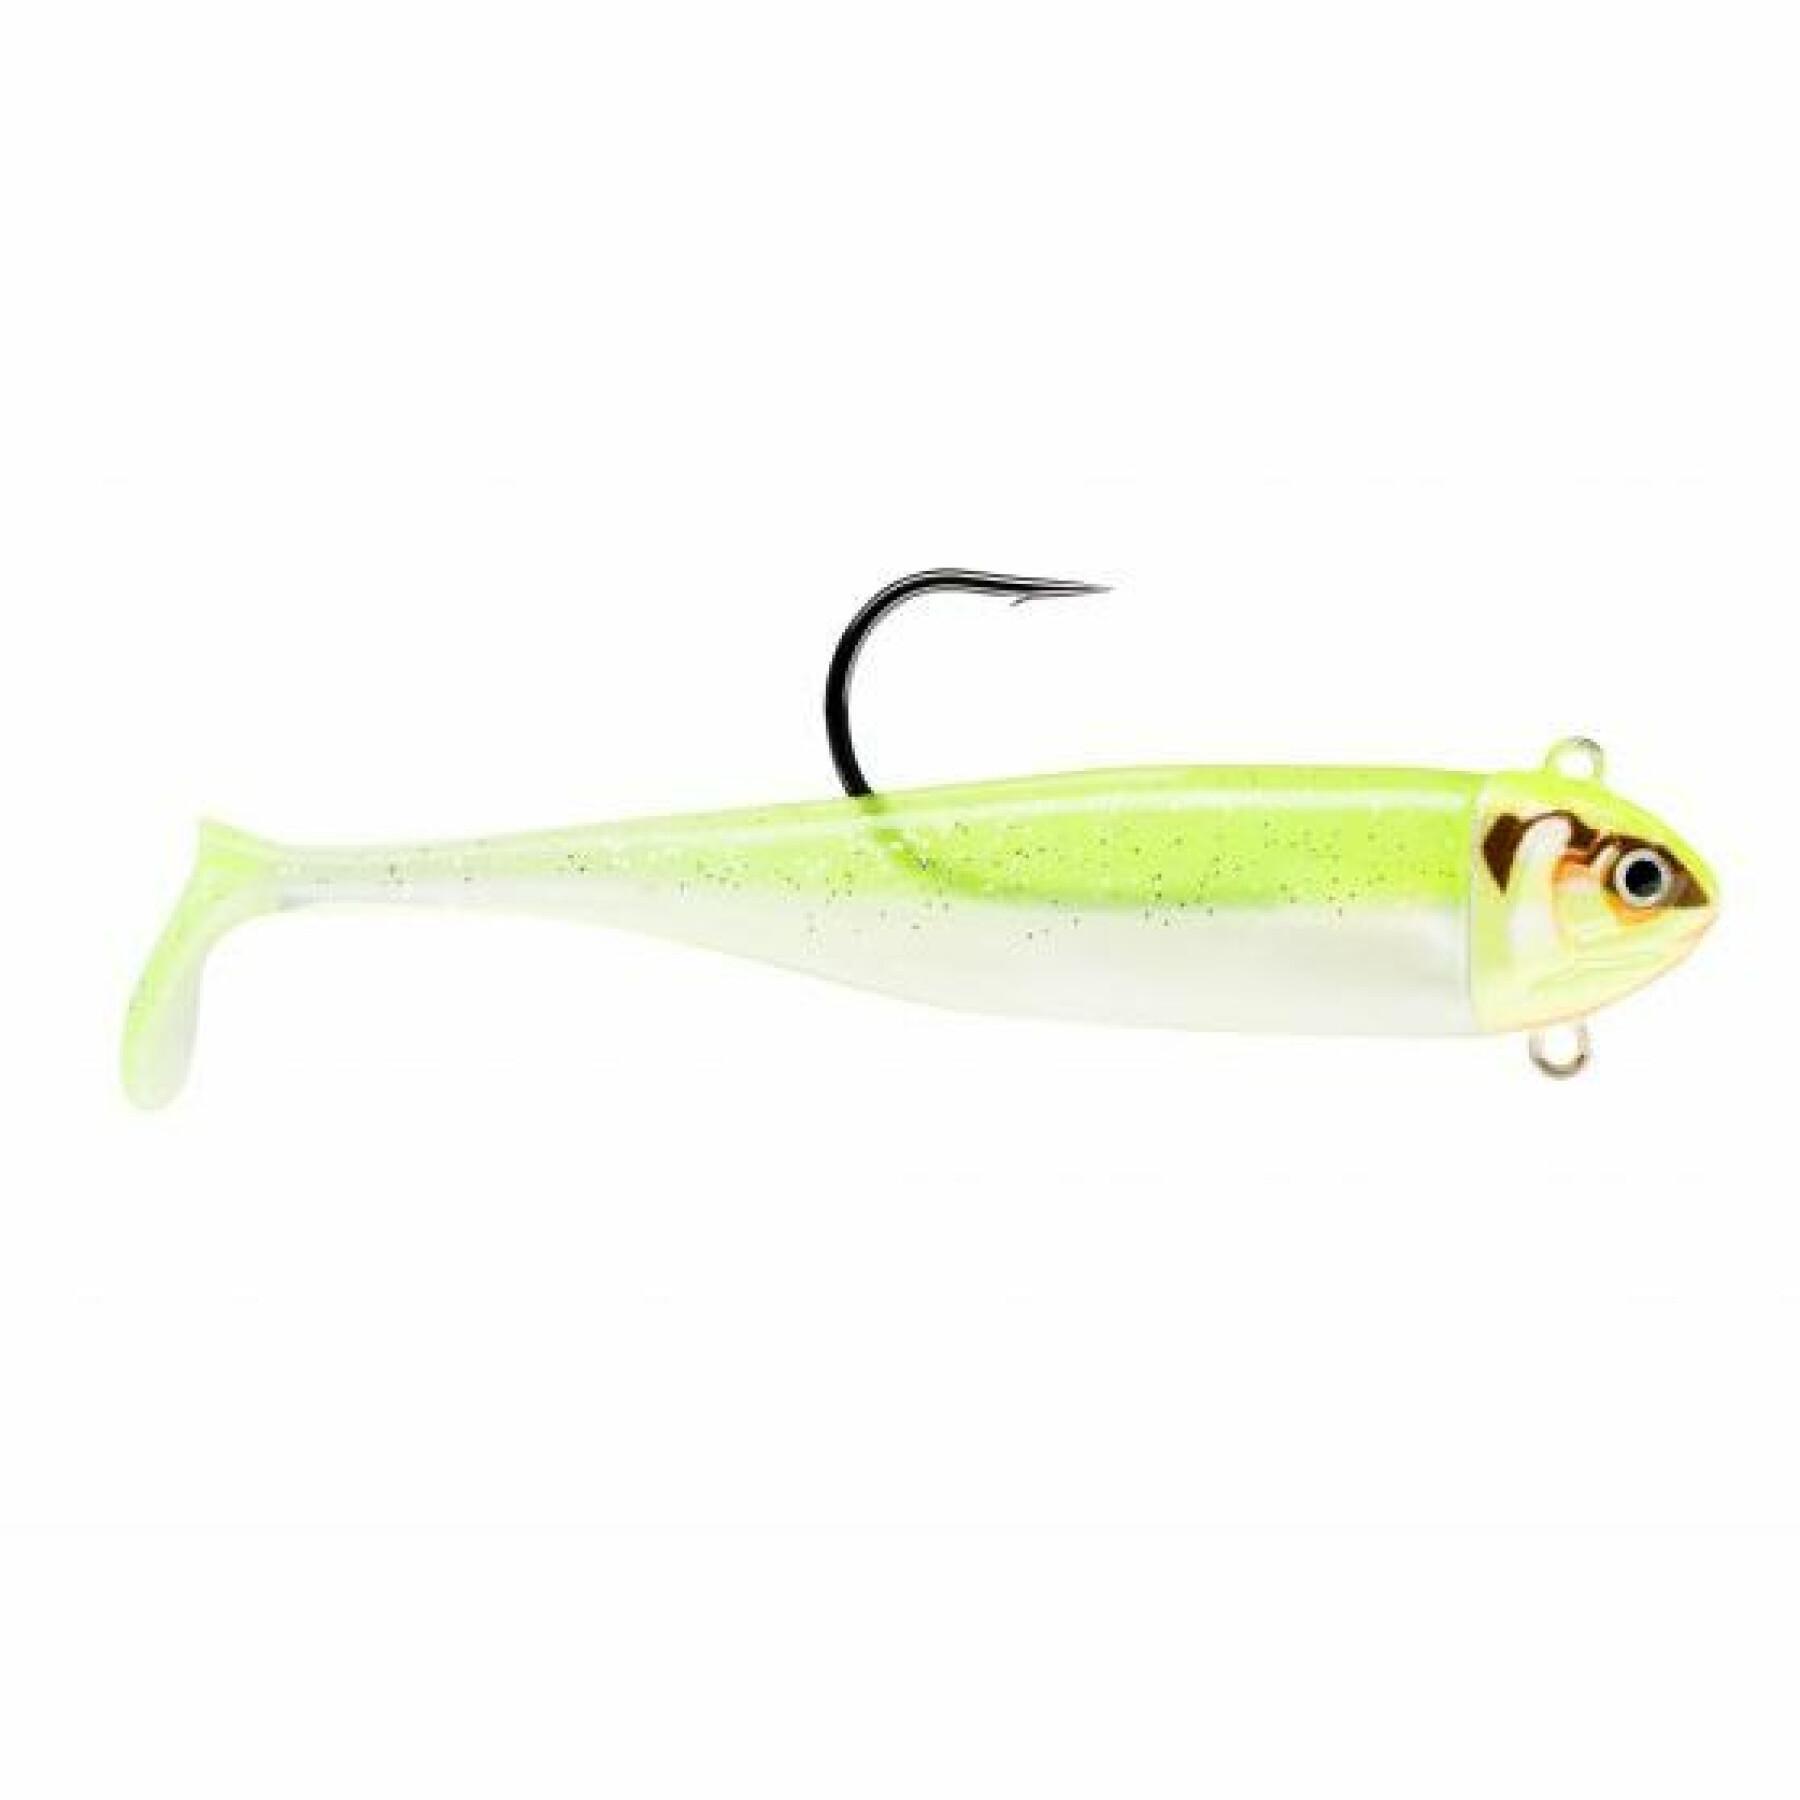 Soft lure Storm 360° gt coastal biscay minnow - Shads - Soft lures